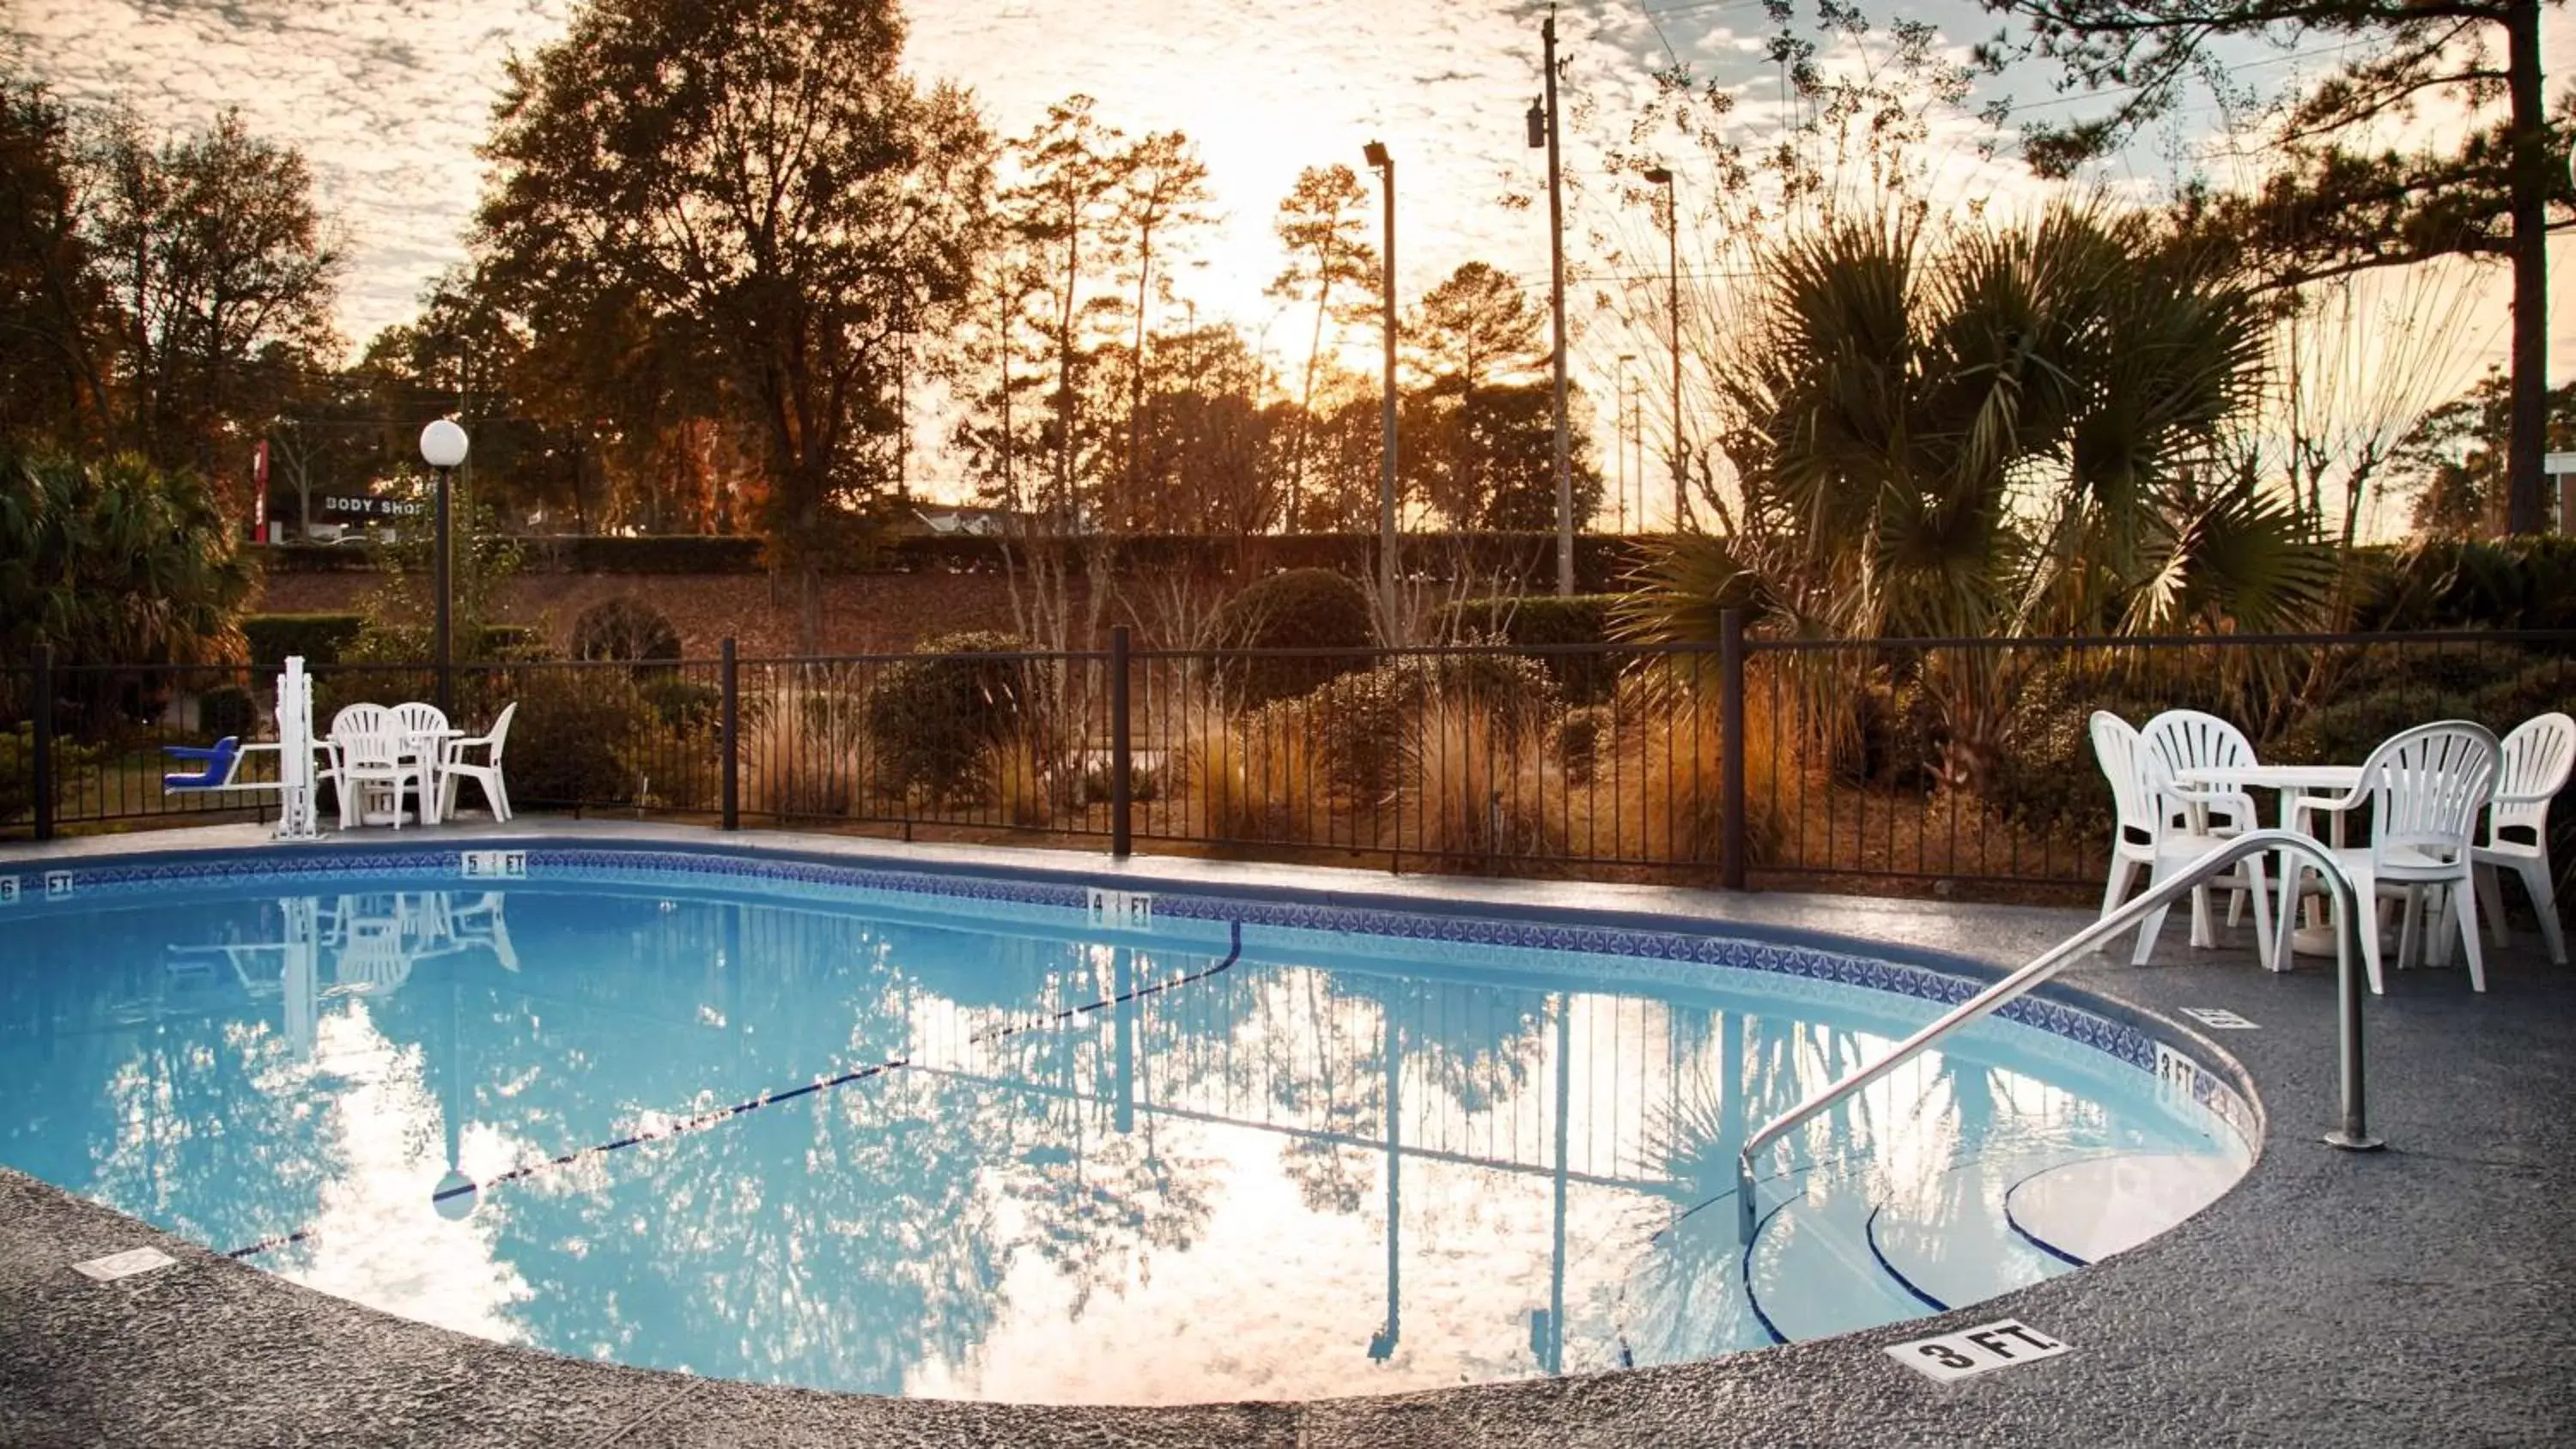 On site, Swimming Pool in Best Western Tallahassee Downtown Inn and Suites